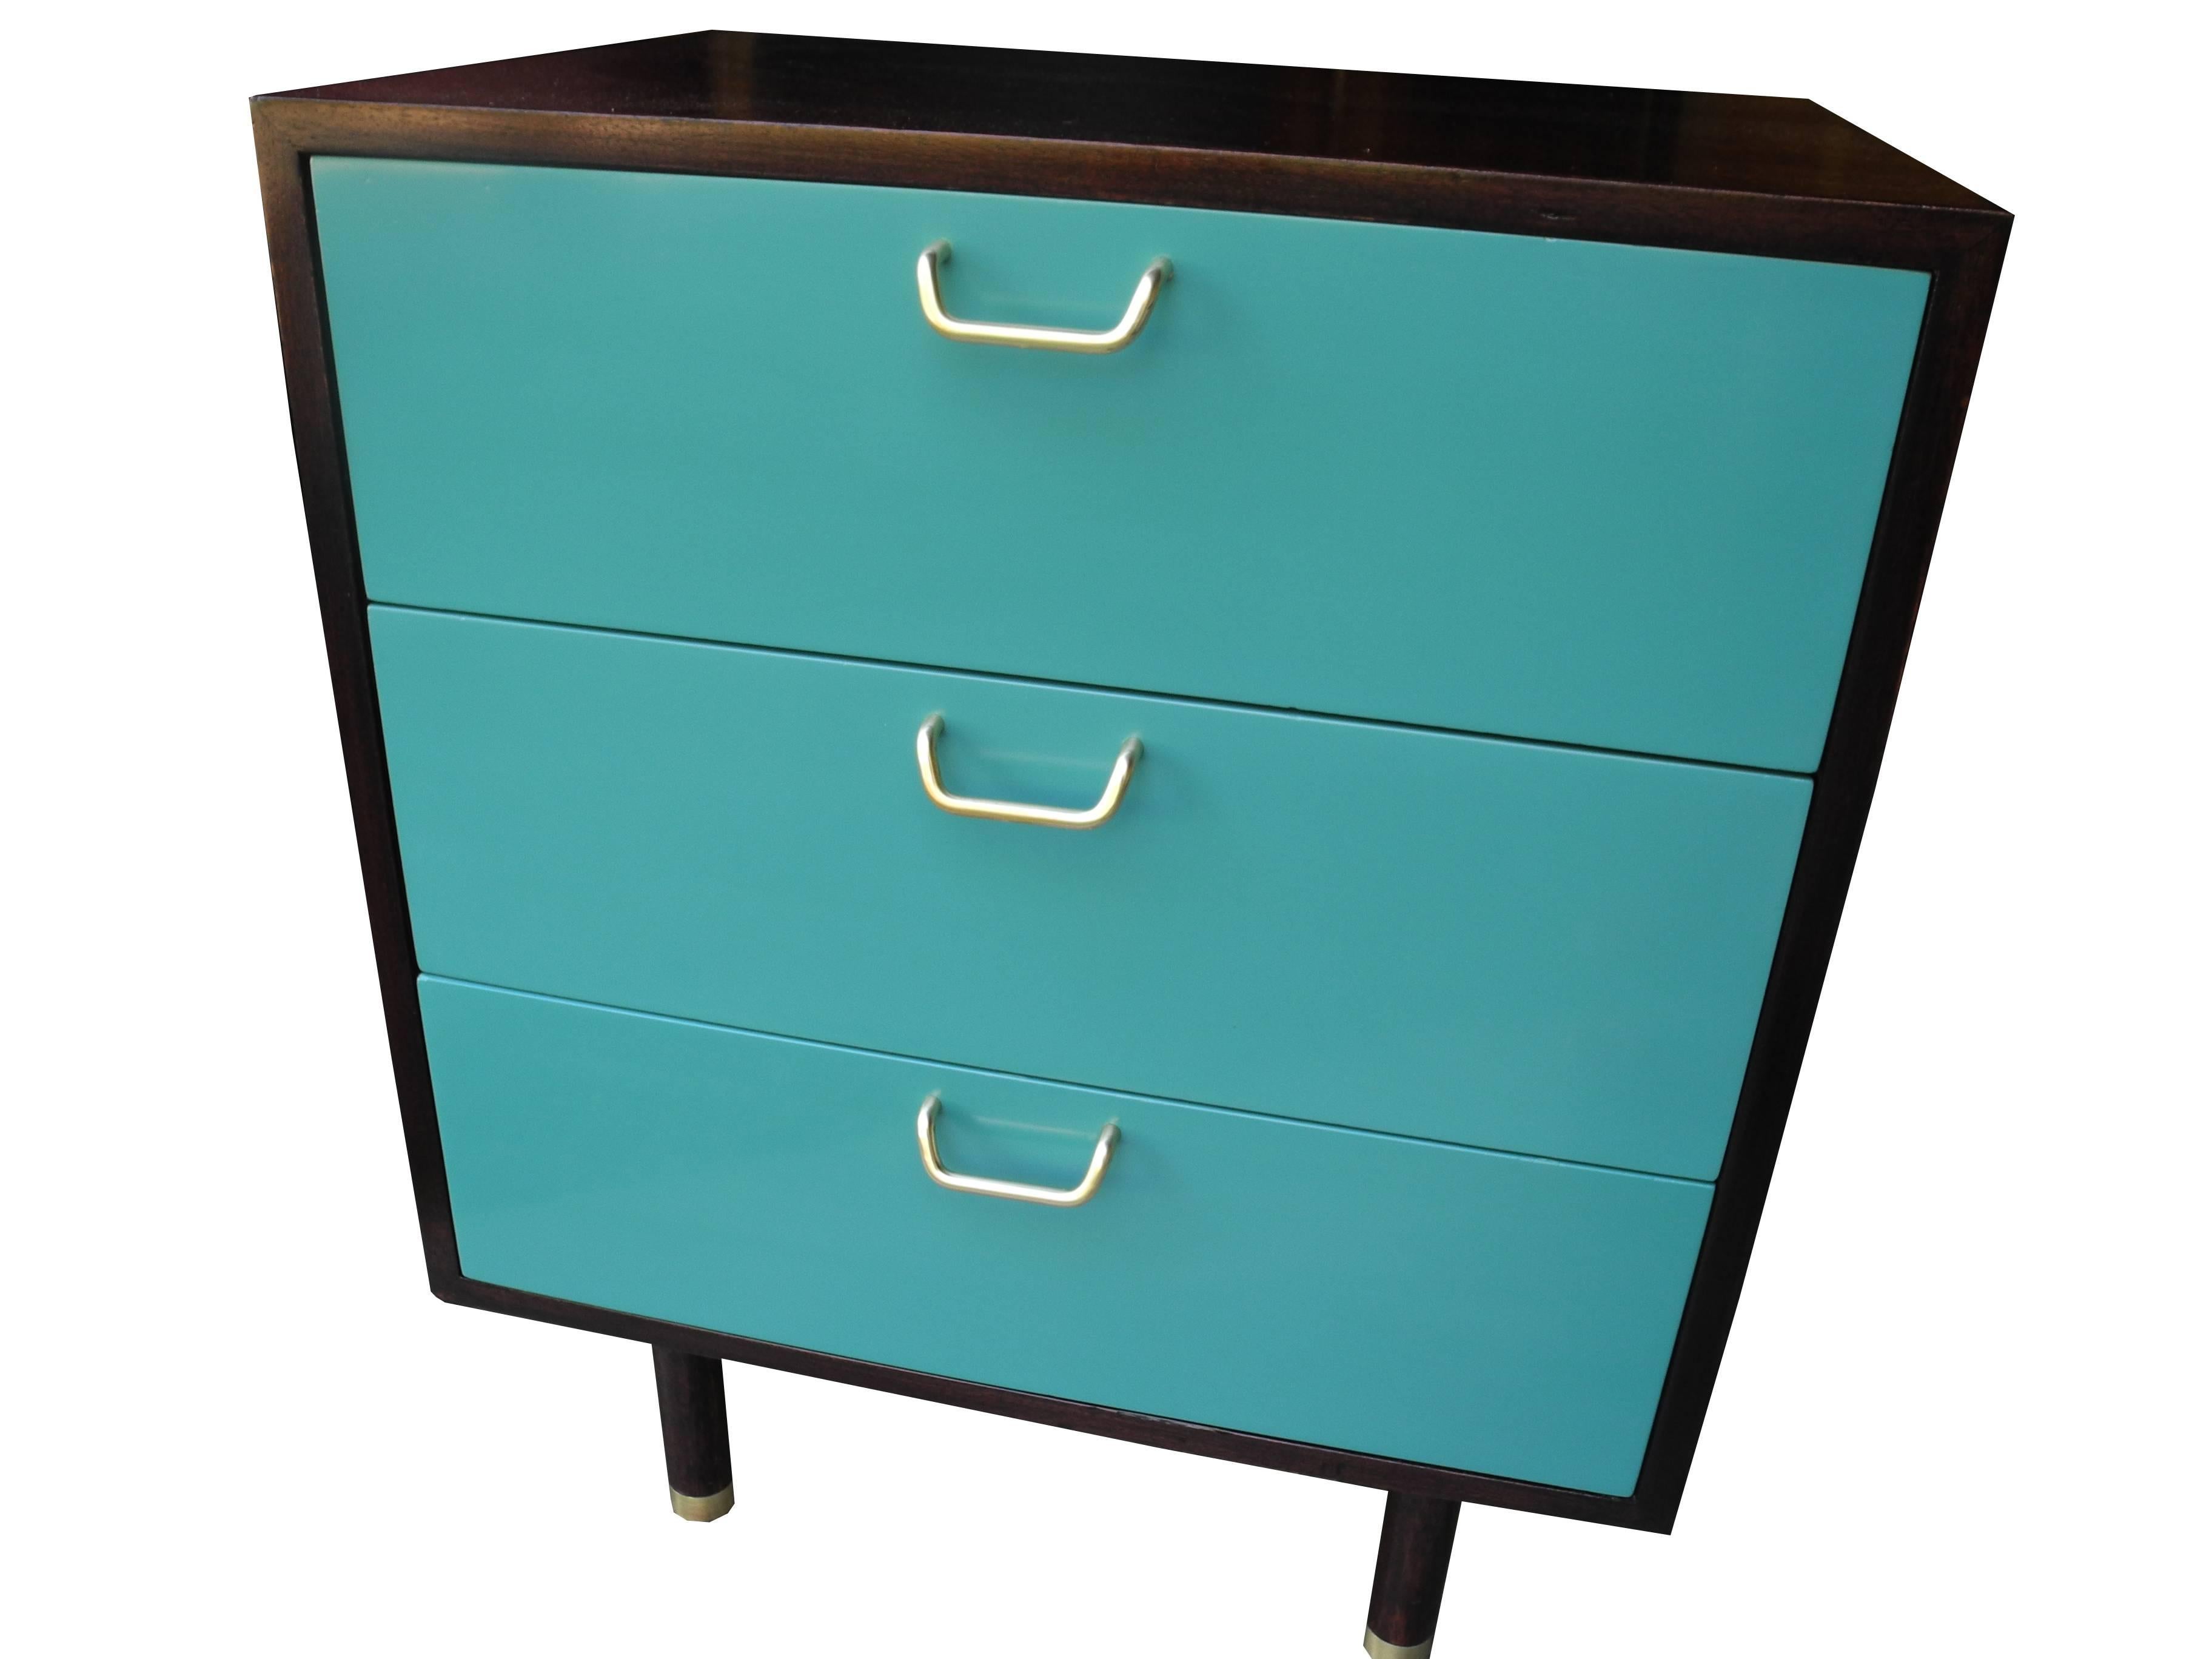 Pair of Mahogoany and Teal Color Modern Nightstands by Harvey Probber In Excellent Condition For Sale In Hudson, NY